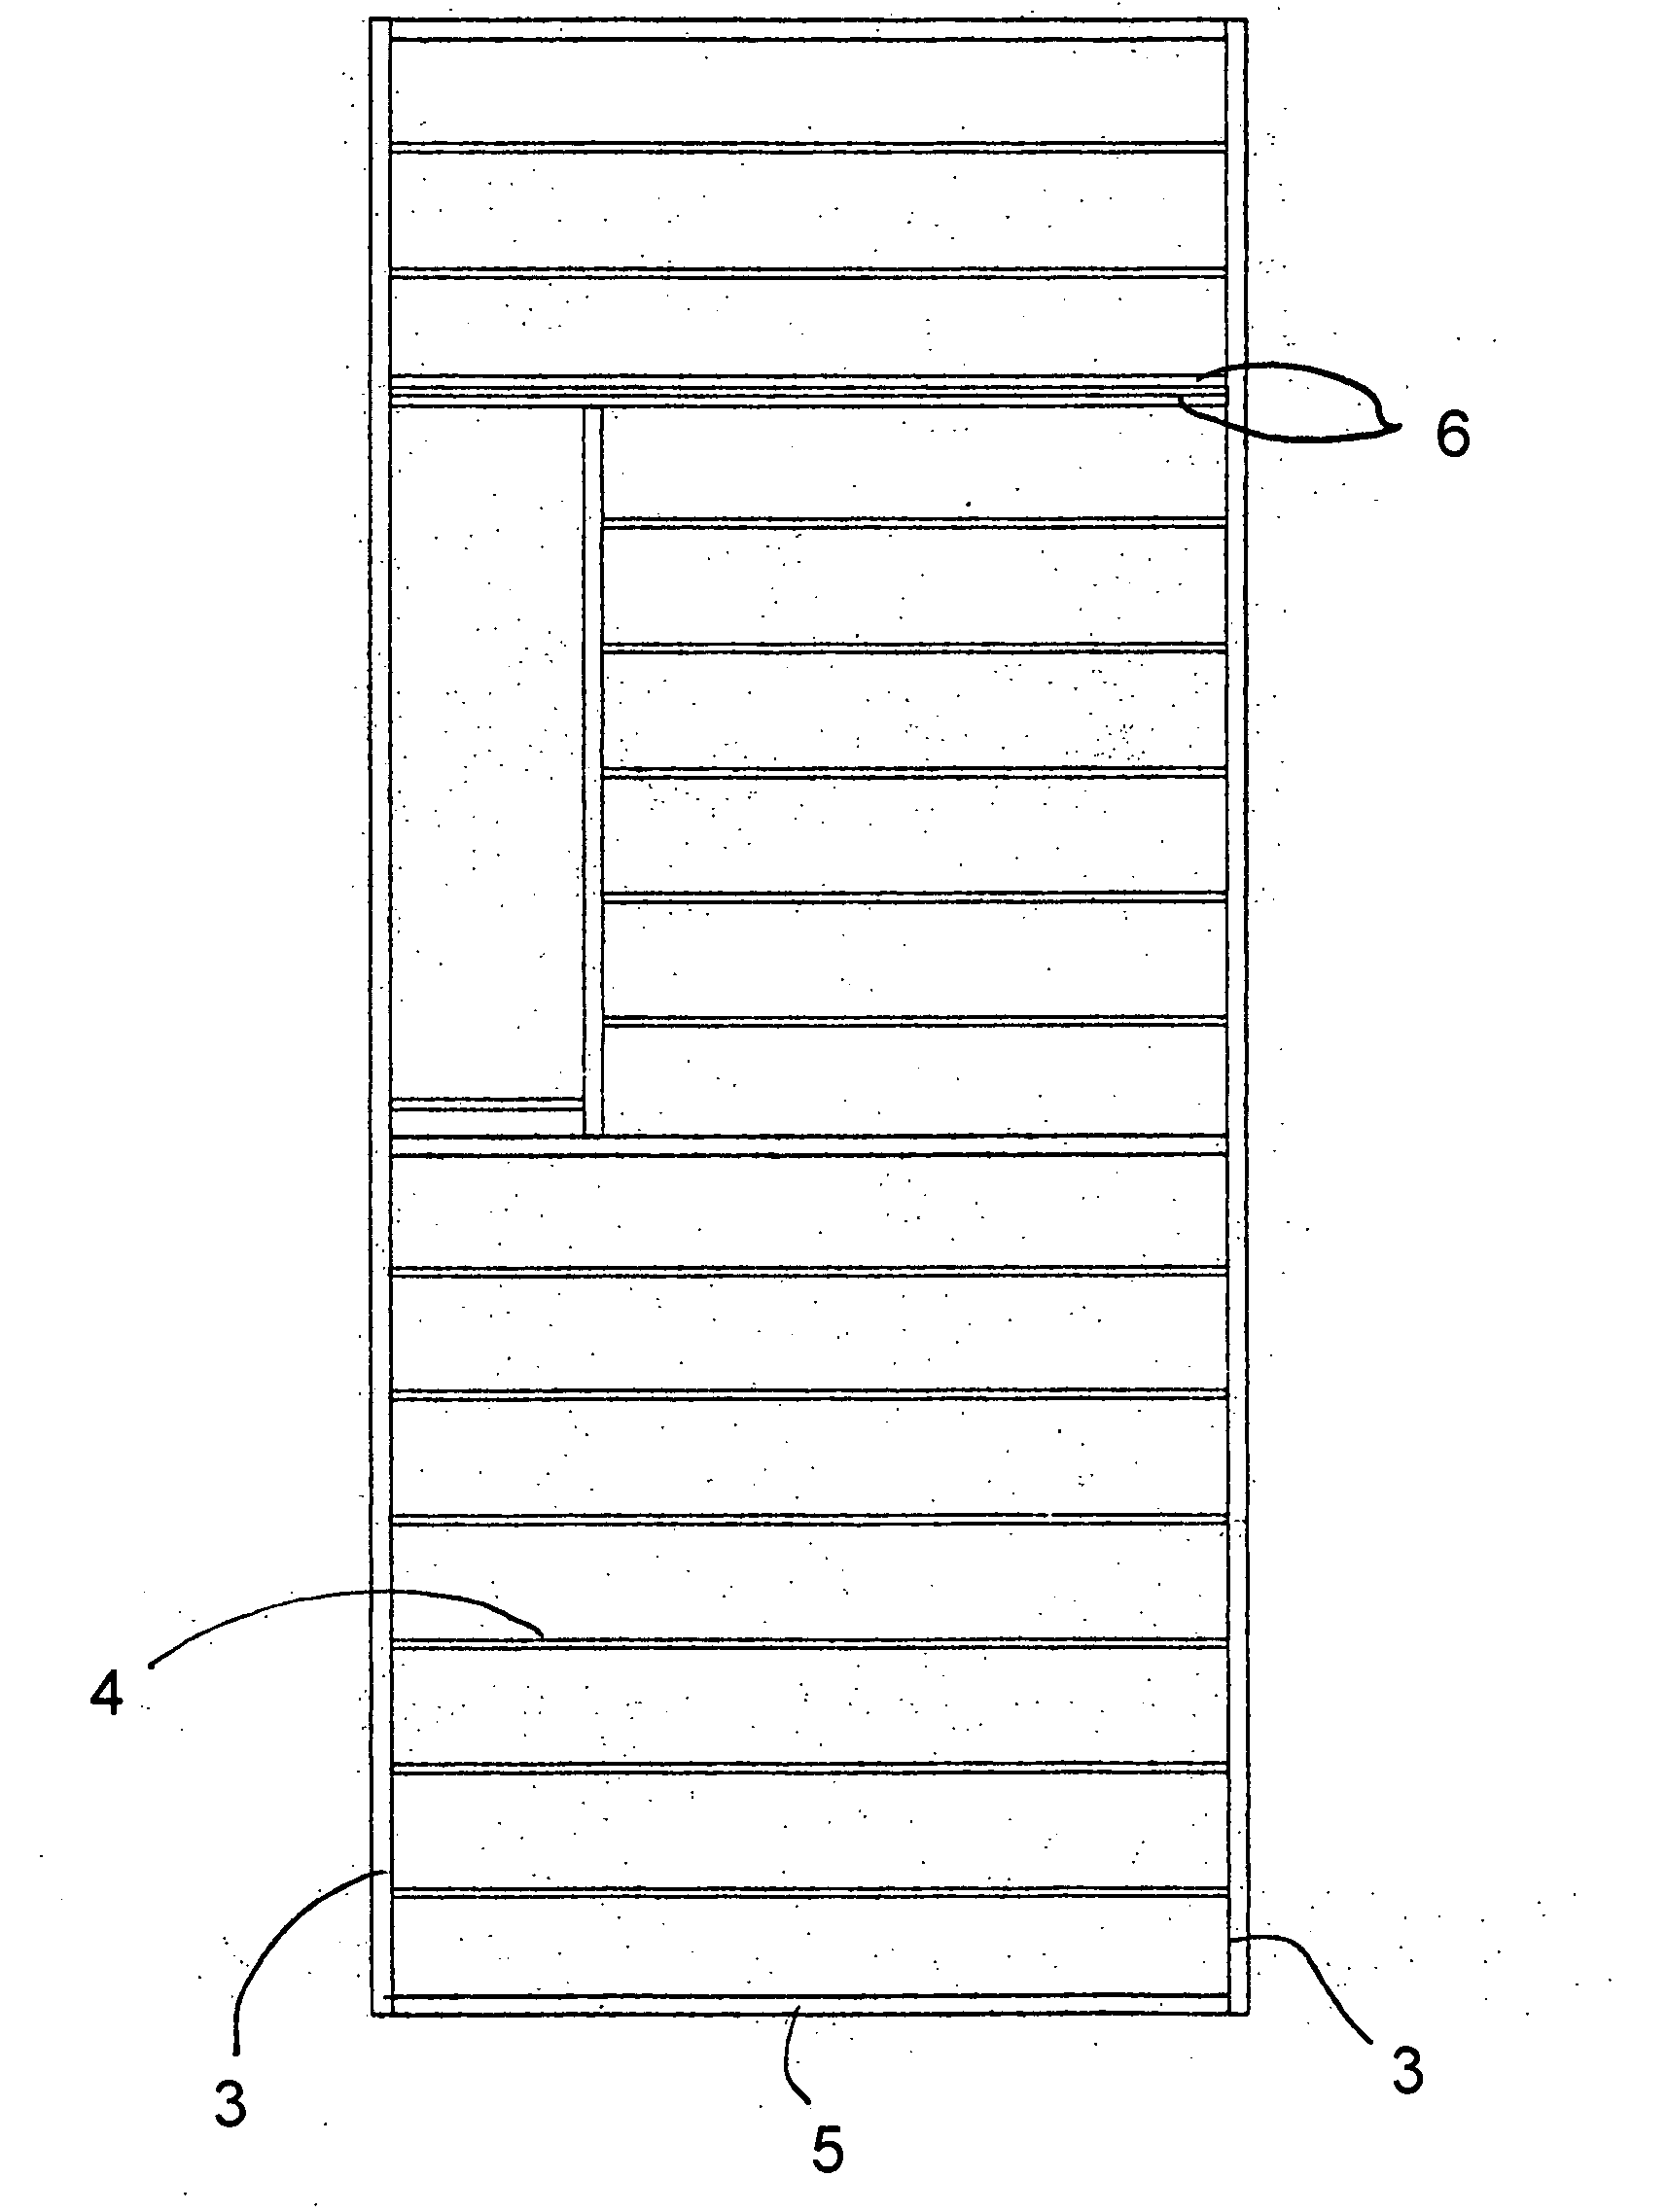 Modular housing system and method of manufacture